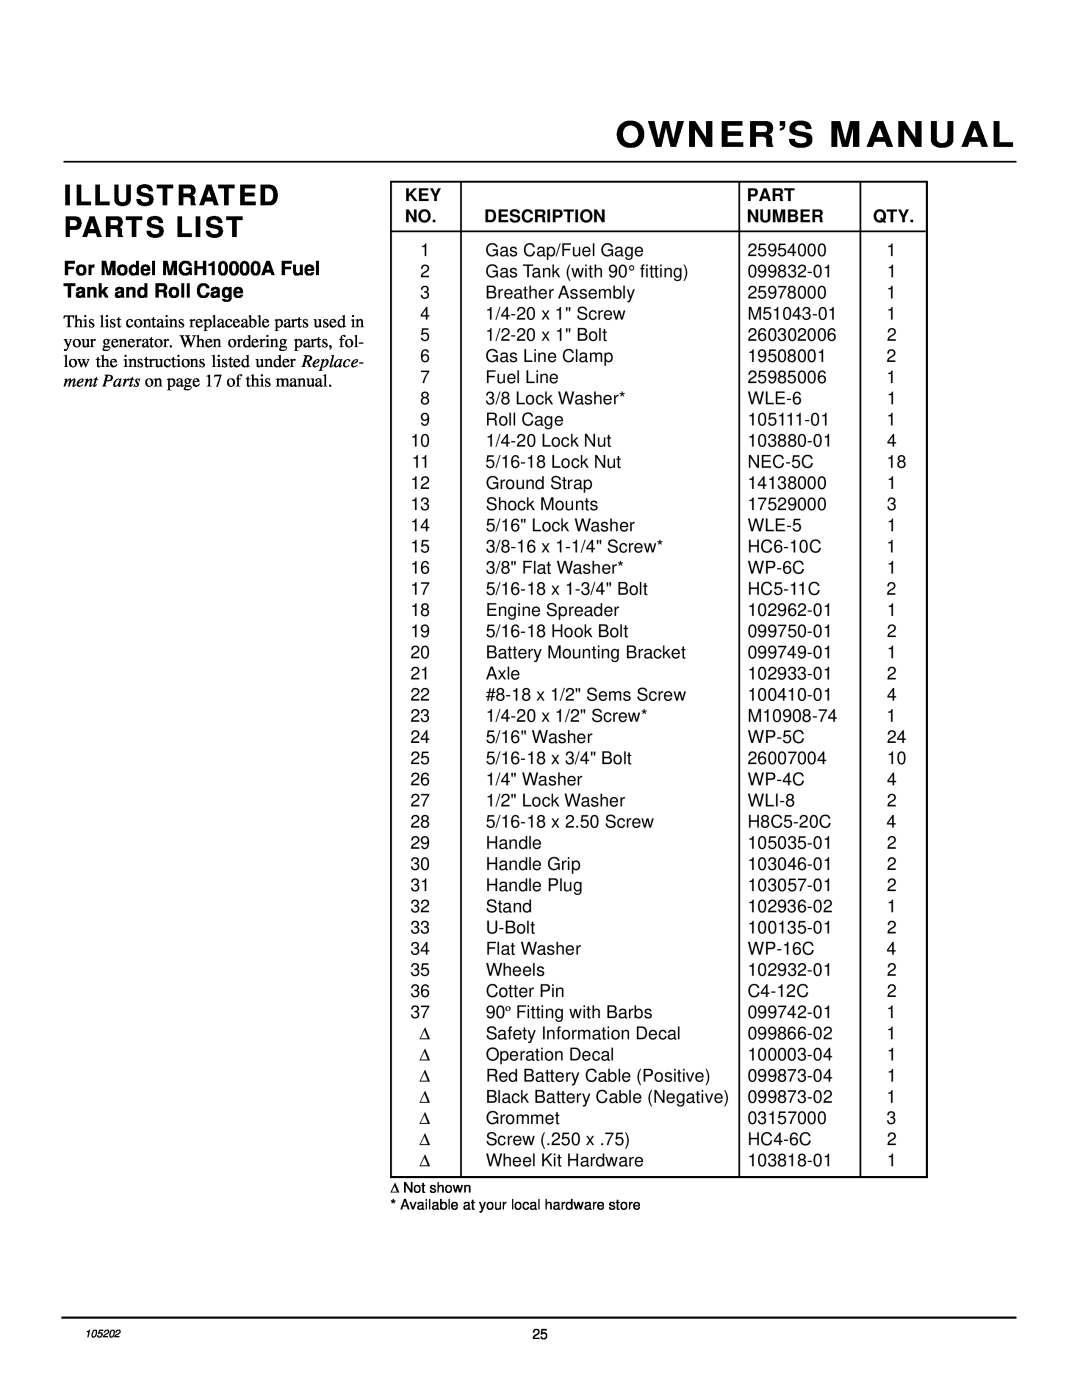 Master Lock installation manual Illustrated Parts List, For Model MGH10000A Fuel Tank and Roll Cage 